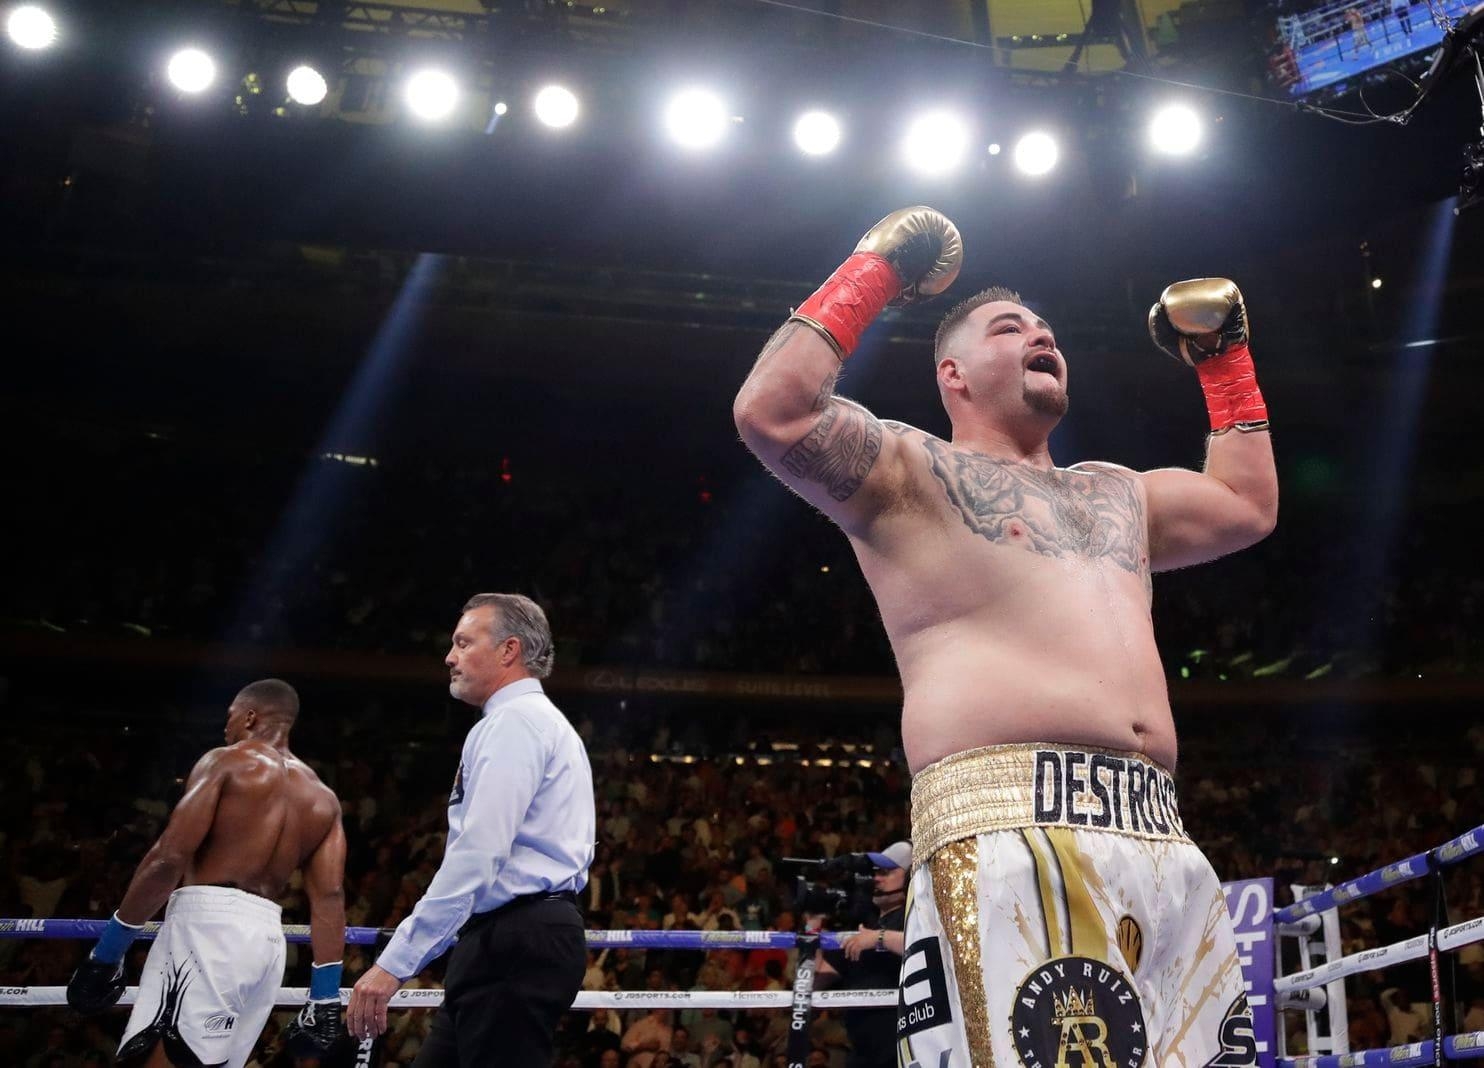 Heavyweight champion Andy Ruiz Jr., once bullied for his weight, says ‘people can relate to me’